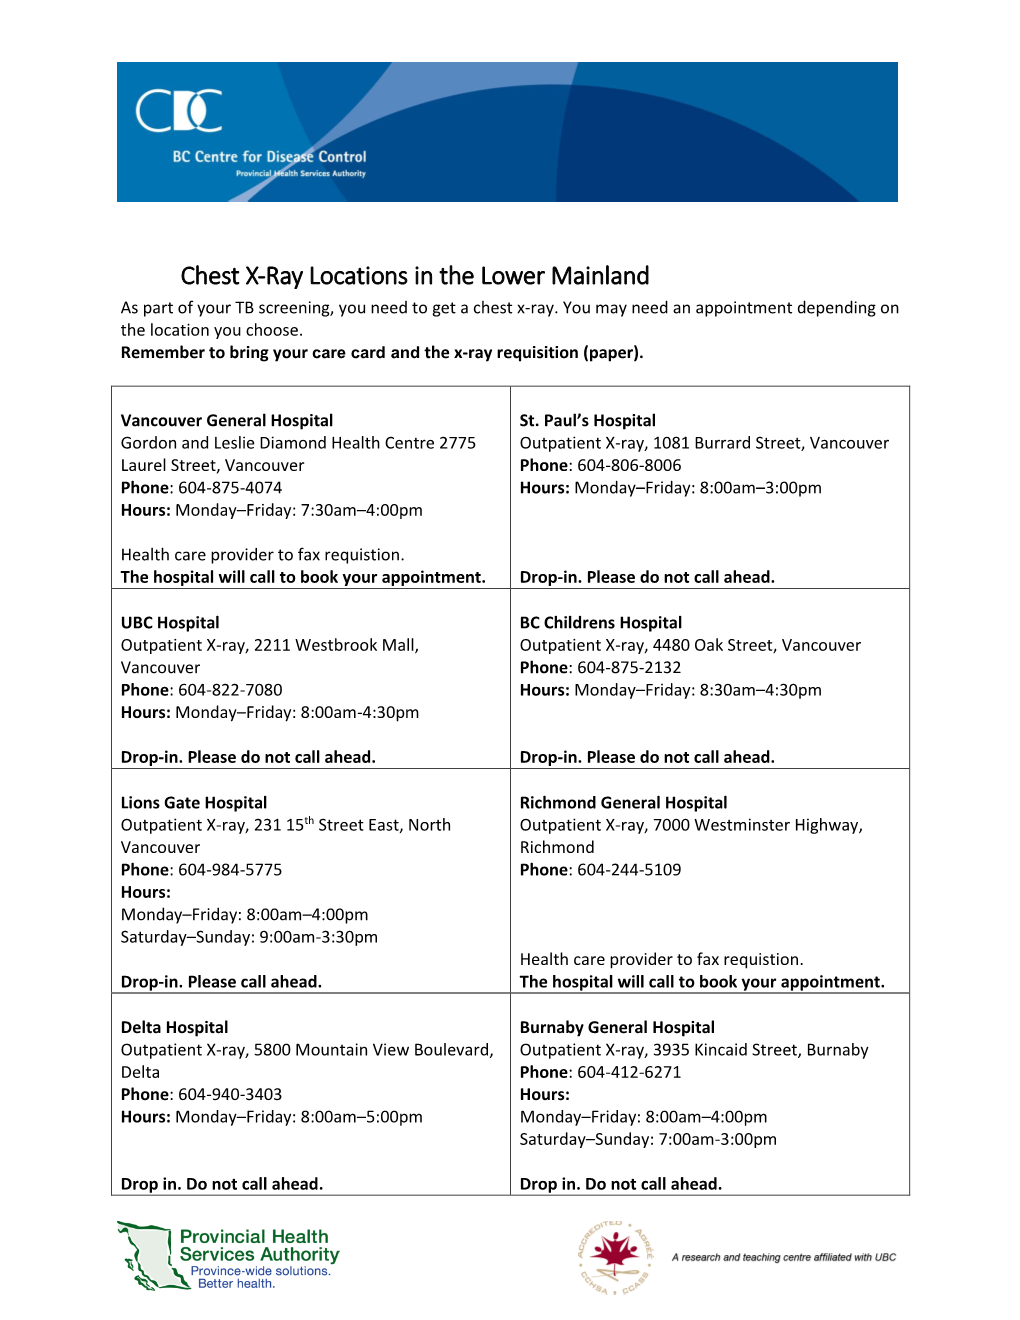 Chest X-Ray Locations in the Lower Mainland As Part of Your TB Screening, You Need to Get a Chest X-Ray